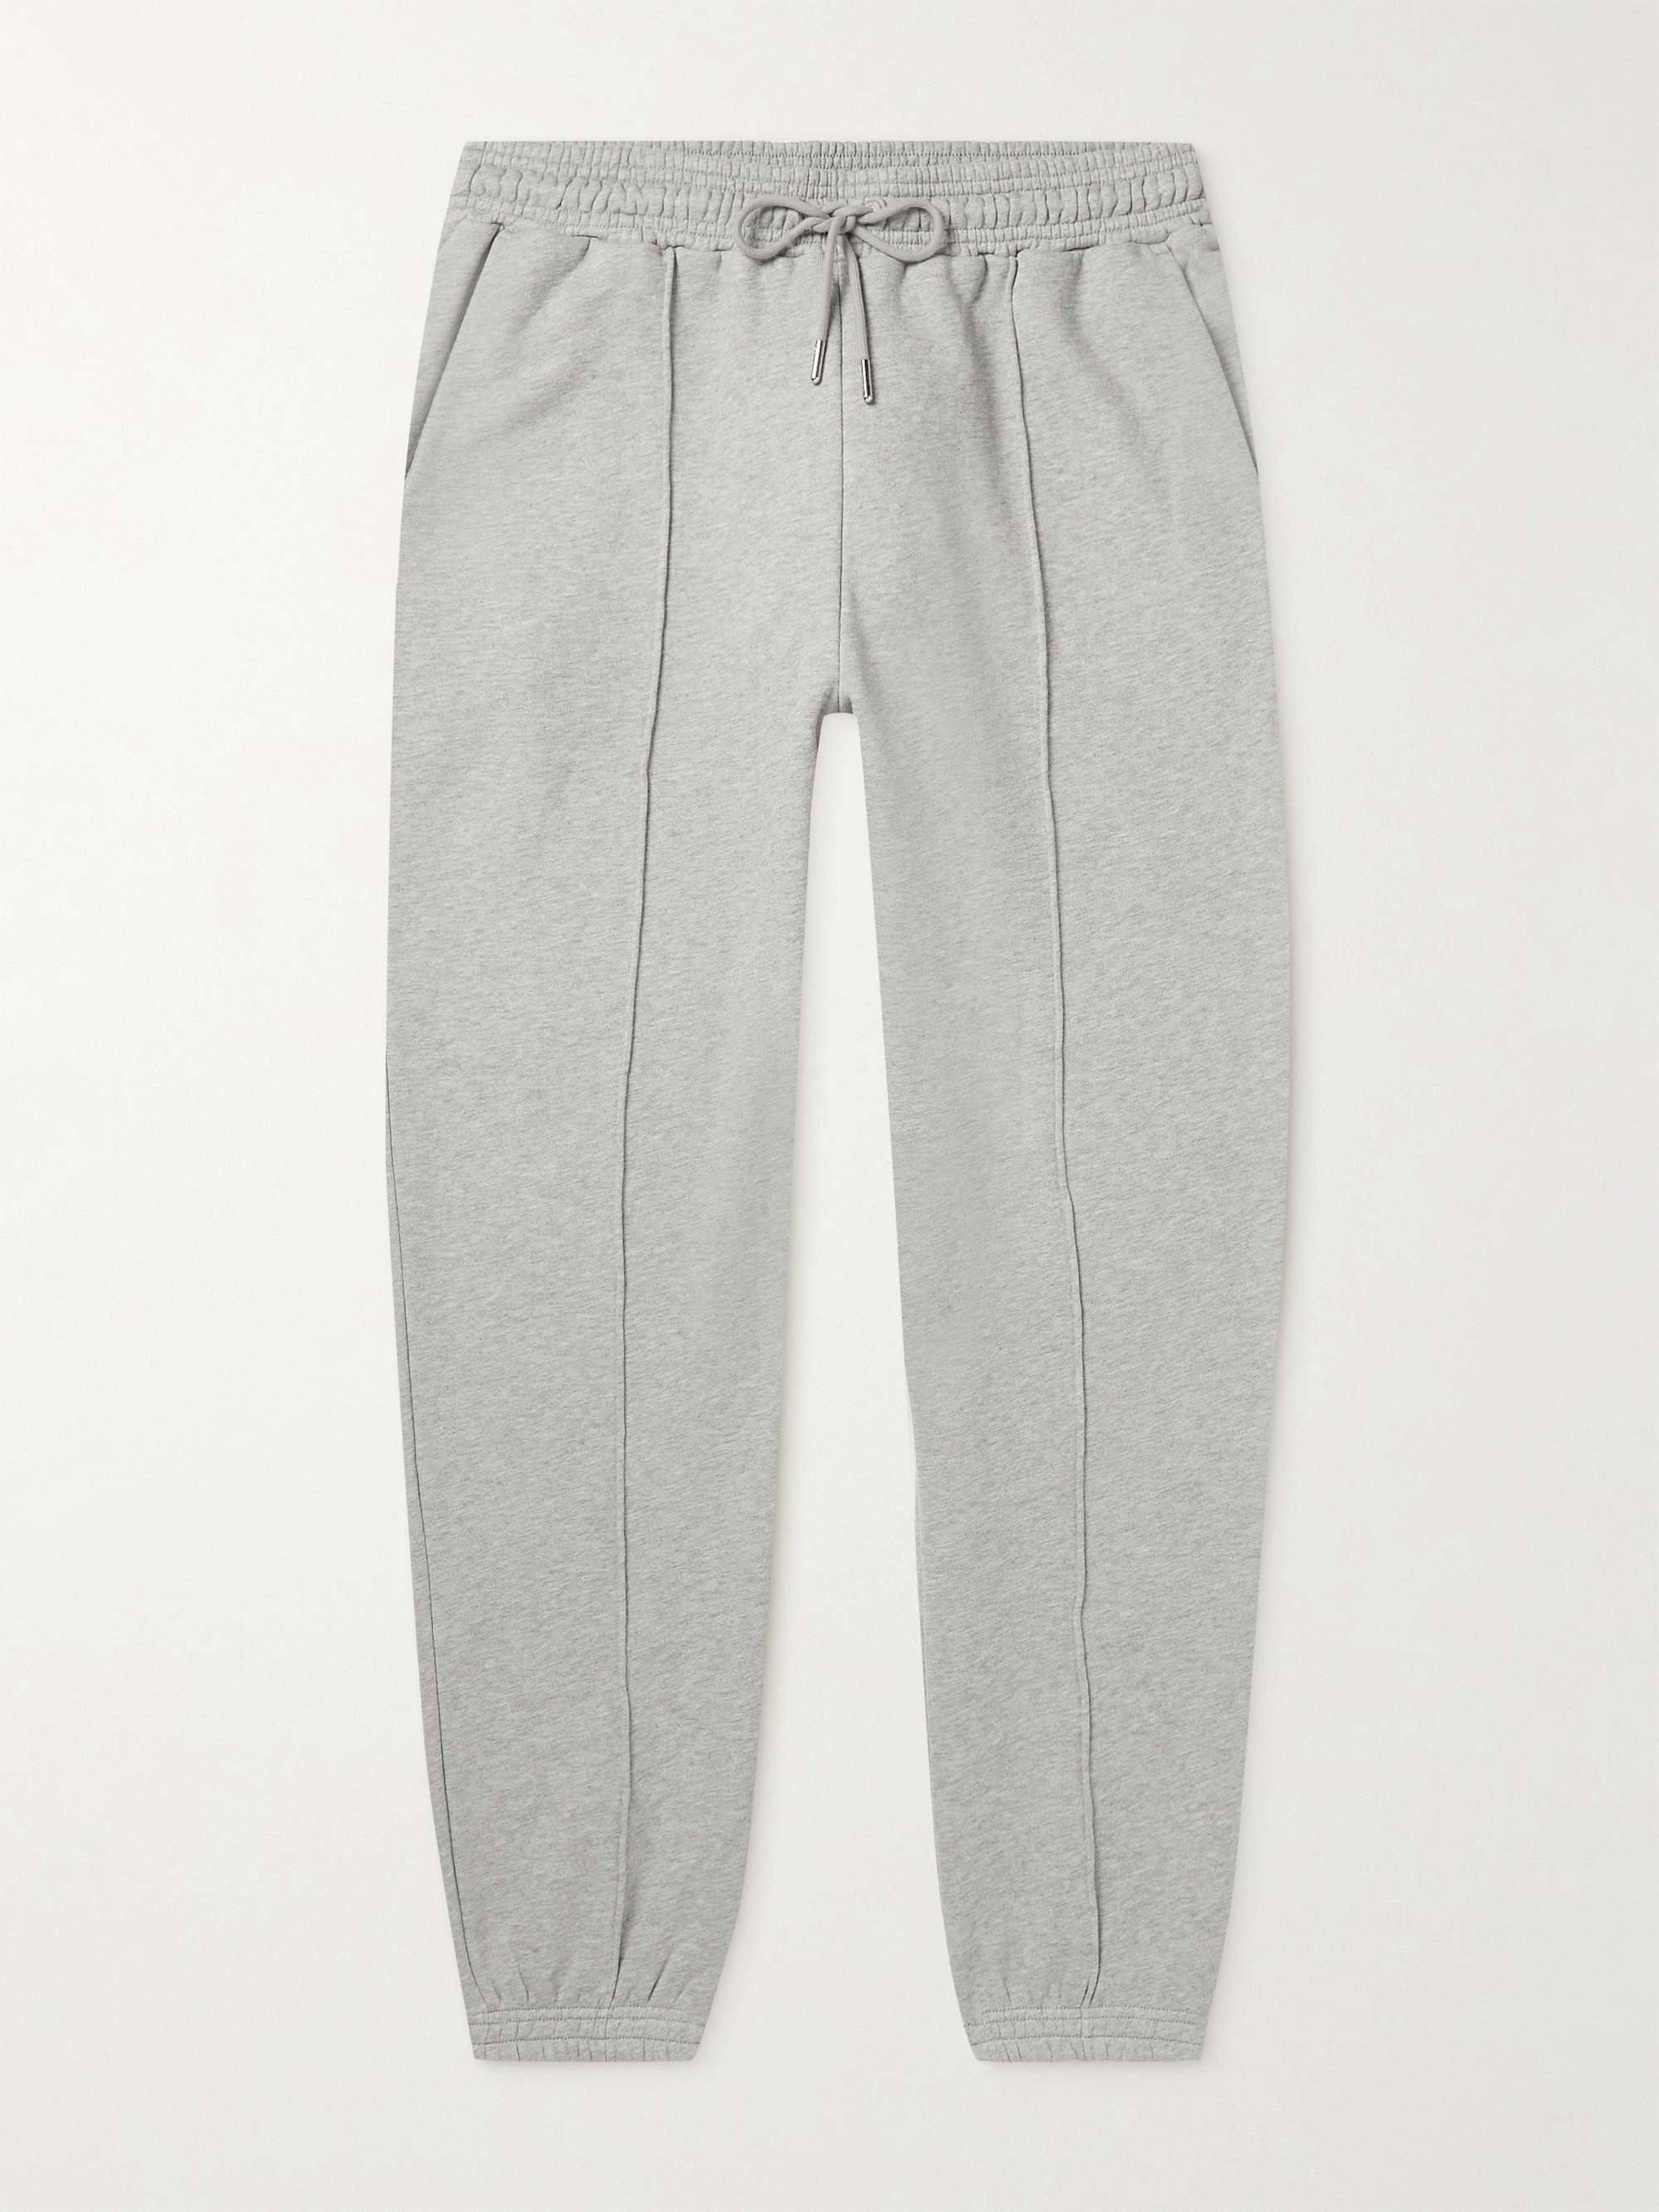 NINETY PERCENT Tapered Organic Cotton-Jersey Sweatpants for Men